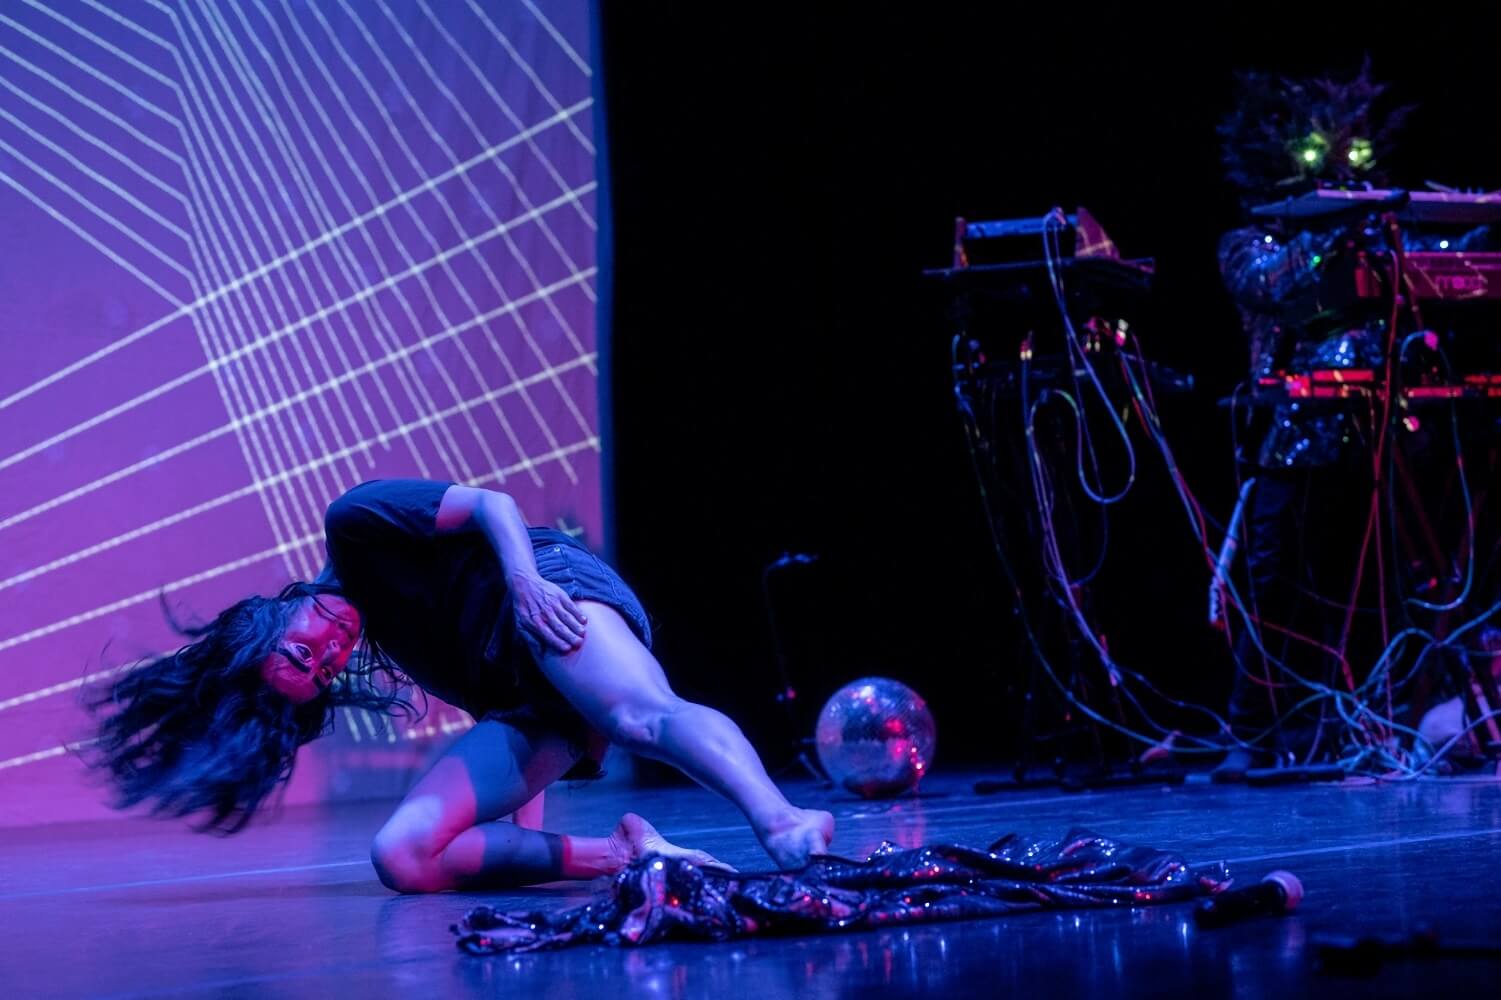 On a stage lit in purple and blue, a female-presenting dancer in a short-sleeved dark shirt and dark shorts presses a knee onto the ground and extends the other leg, while tilting her head down and swinging it so that her long black hair flies out away from her skull.  In front of her is a rumpled and highly reflective swatch of fabric, and behind her a disco ball rests on the ground. The left side of the background shows part of a backdrop for the performance, which is a series of sets of thin white lines crossing over each other like string art. On the right side we can see part of what appears to be a DJ table with cables and equipment. 